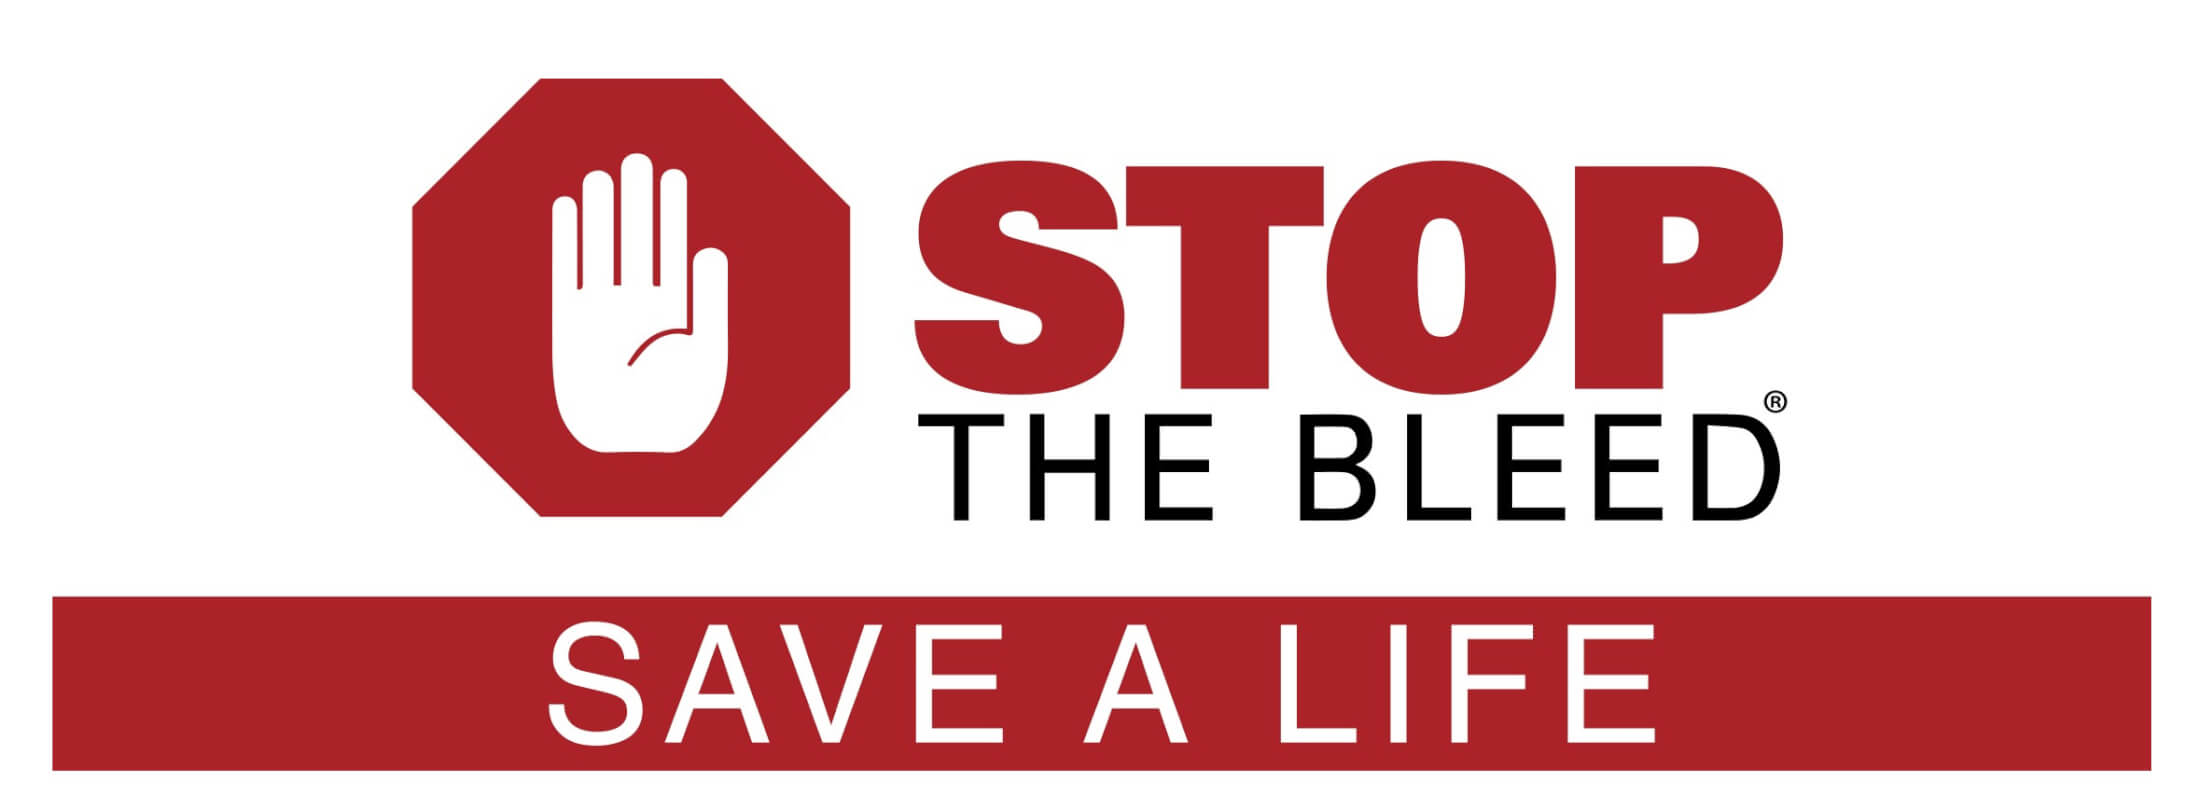 Stop the Bleed, Save a Life text